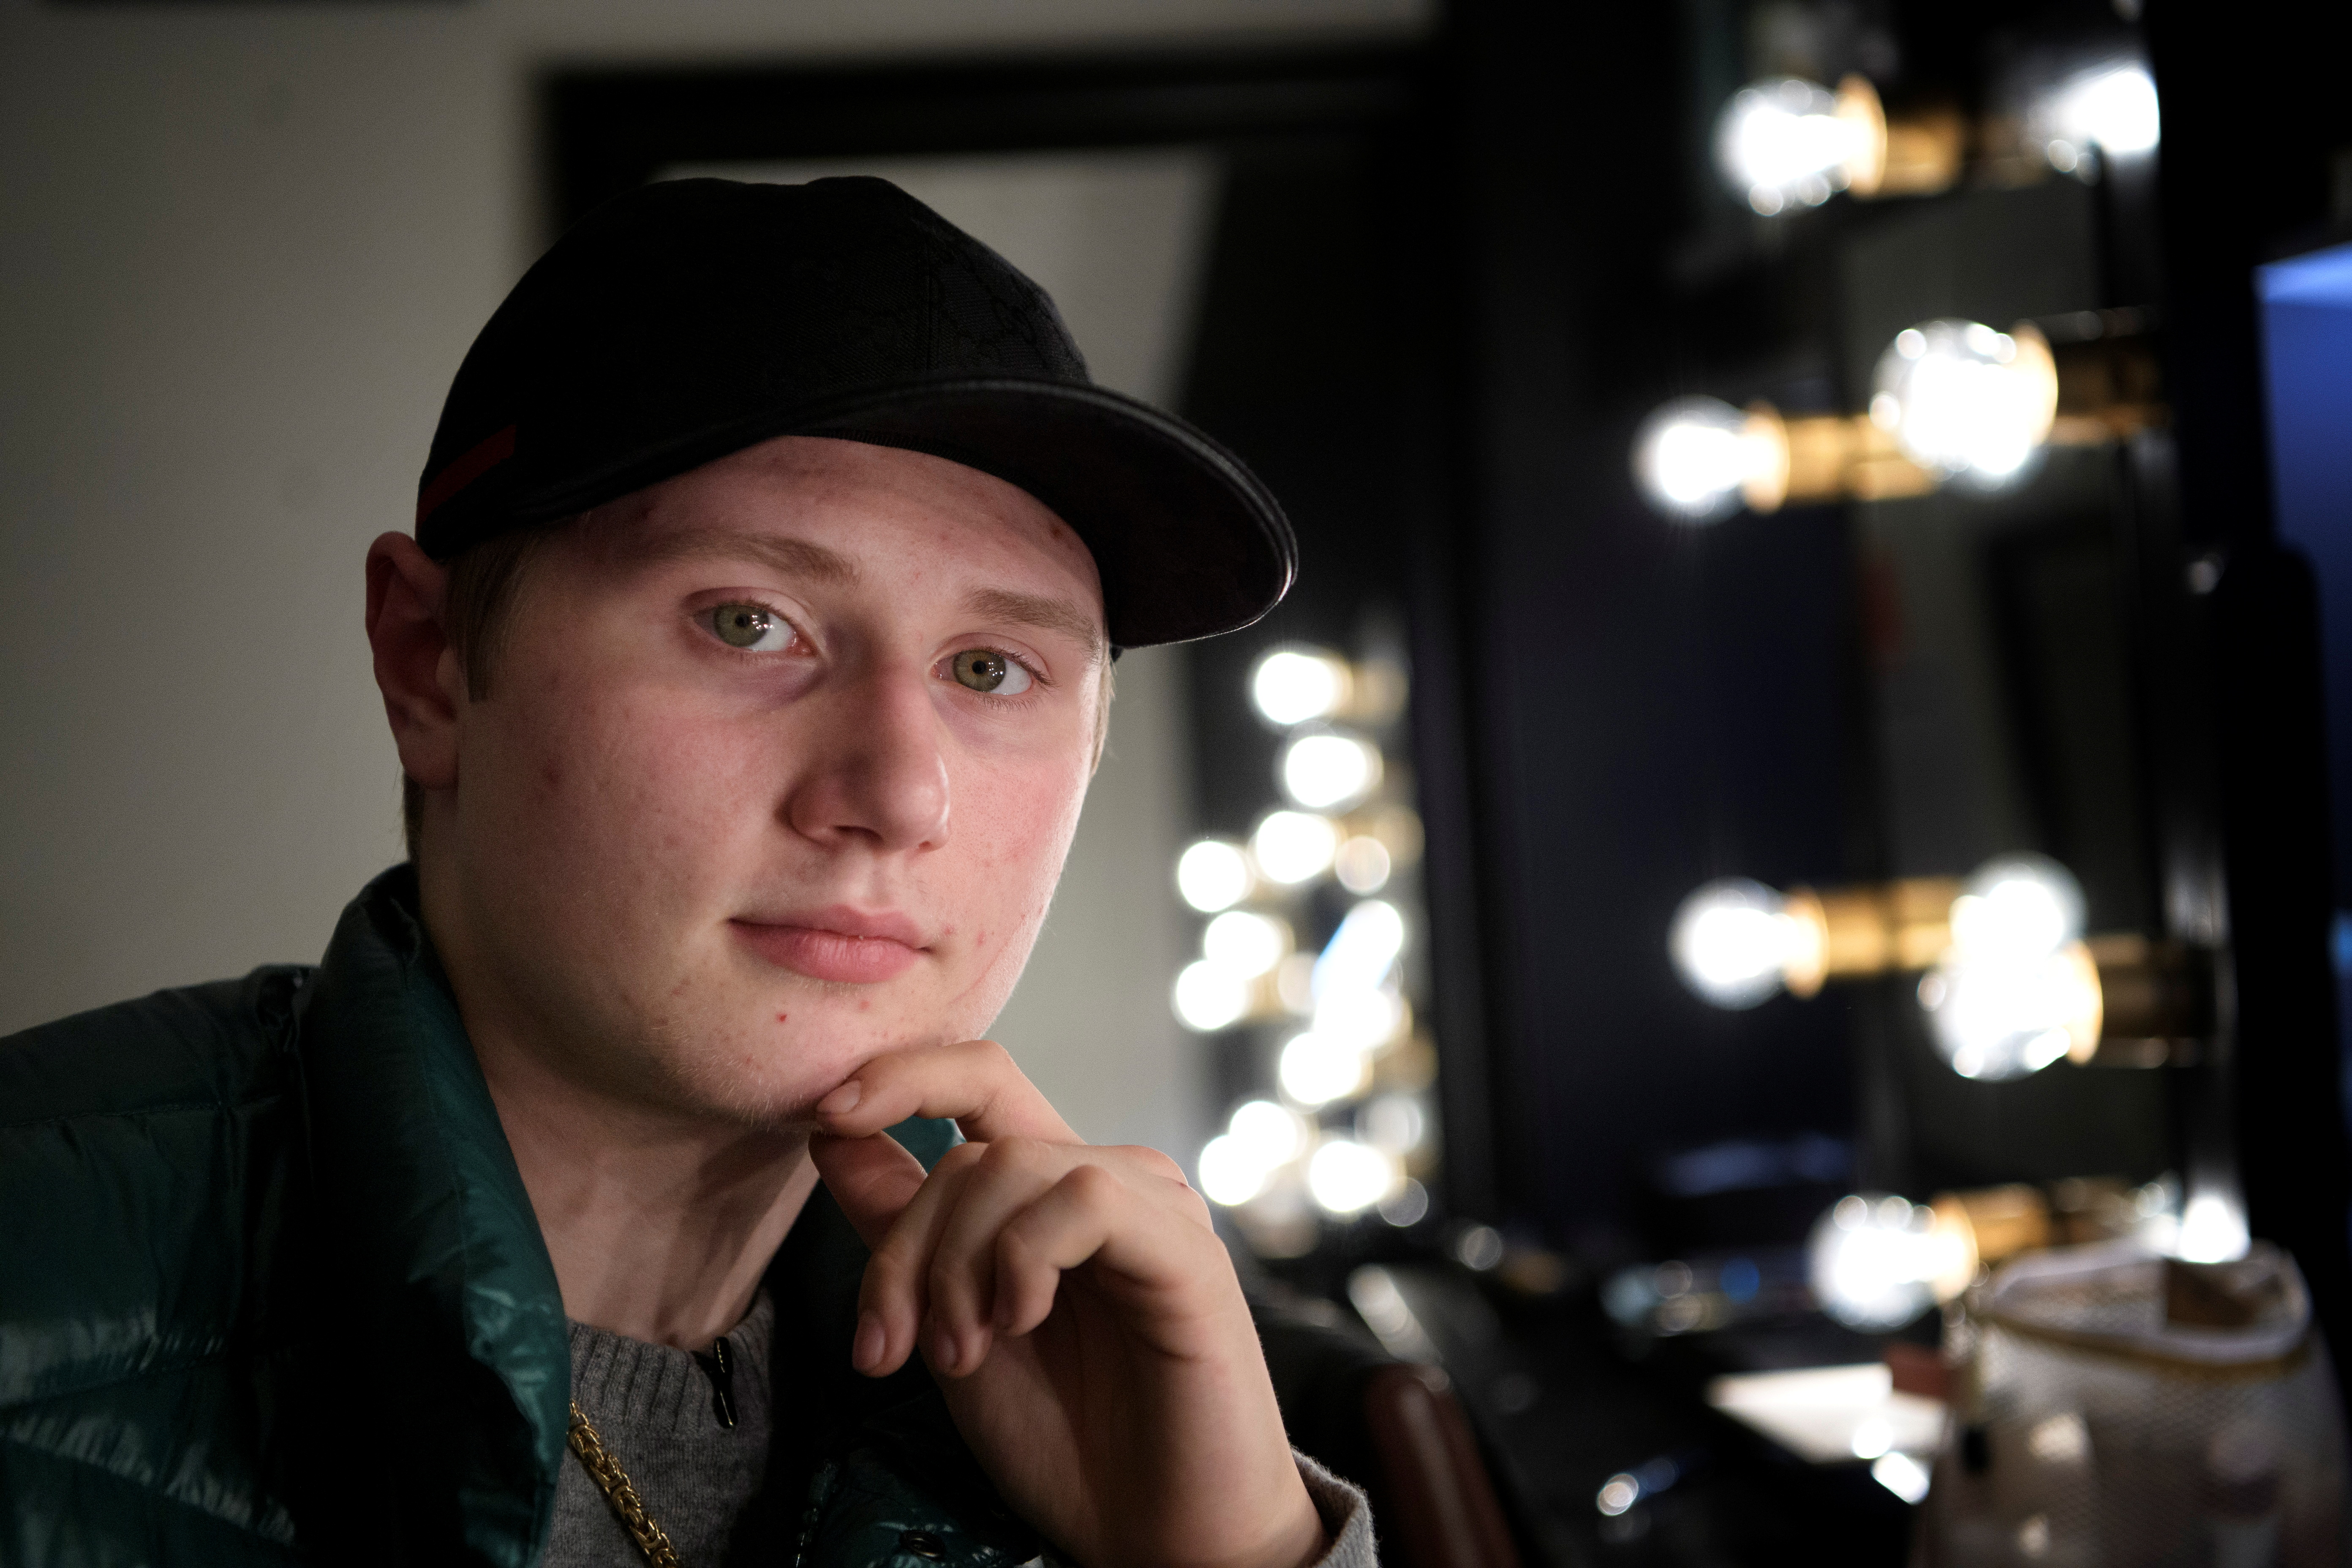 Swedish rapper Einar poses in this file photo